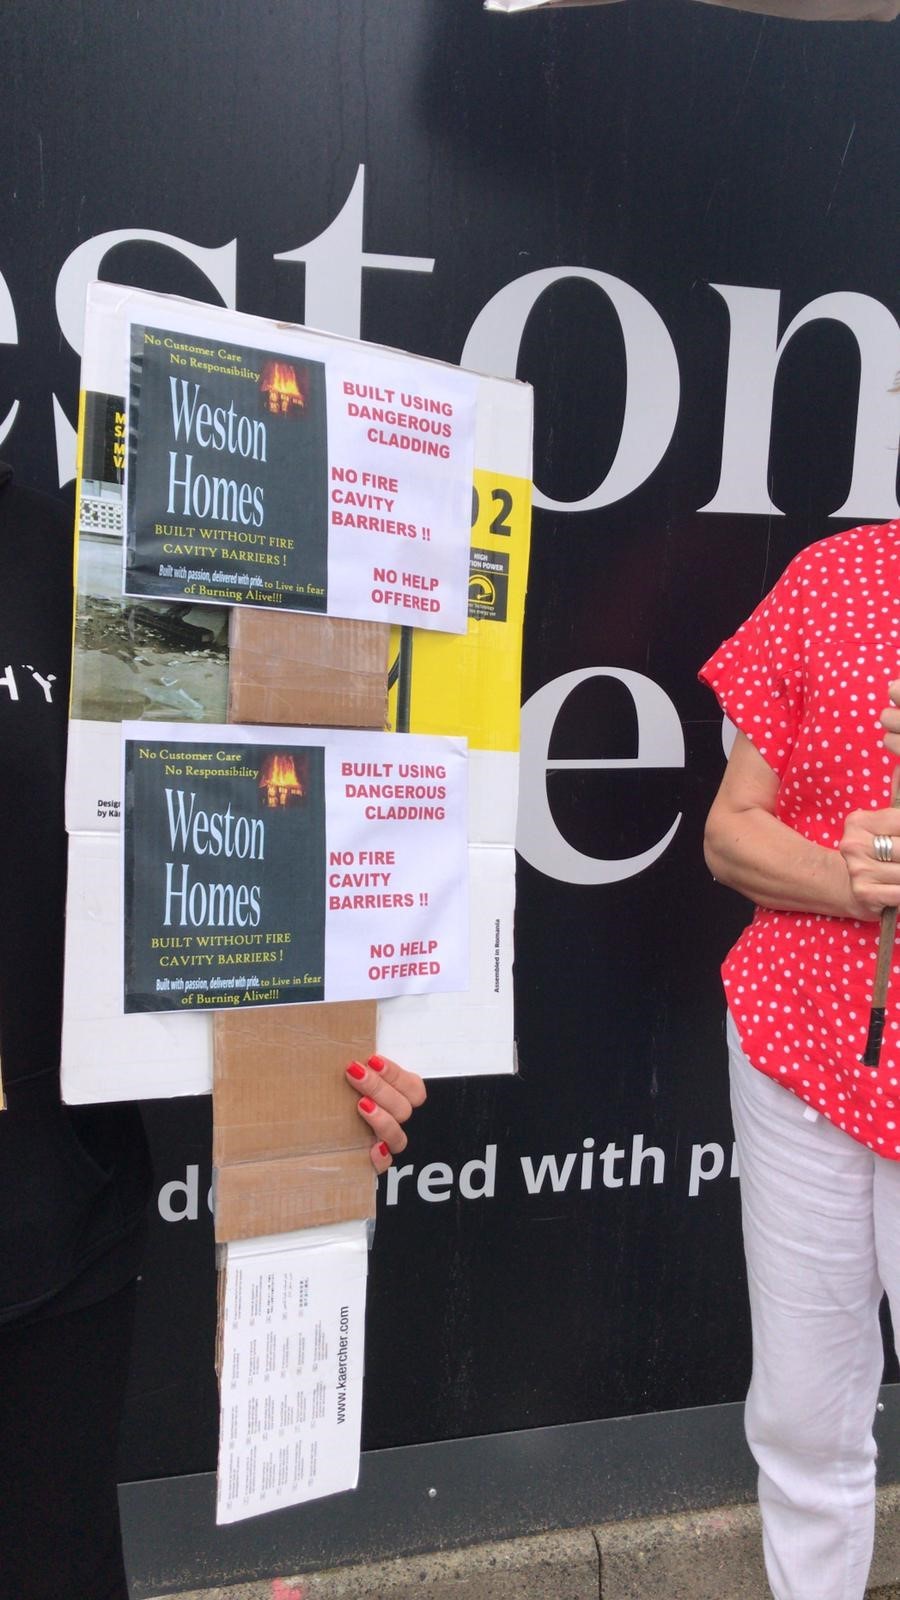 Protest - Members of the public including Basildon resident Jane Randle against Weston Homes